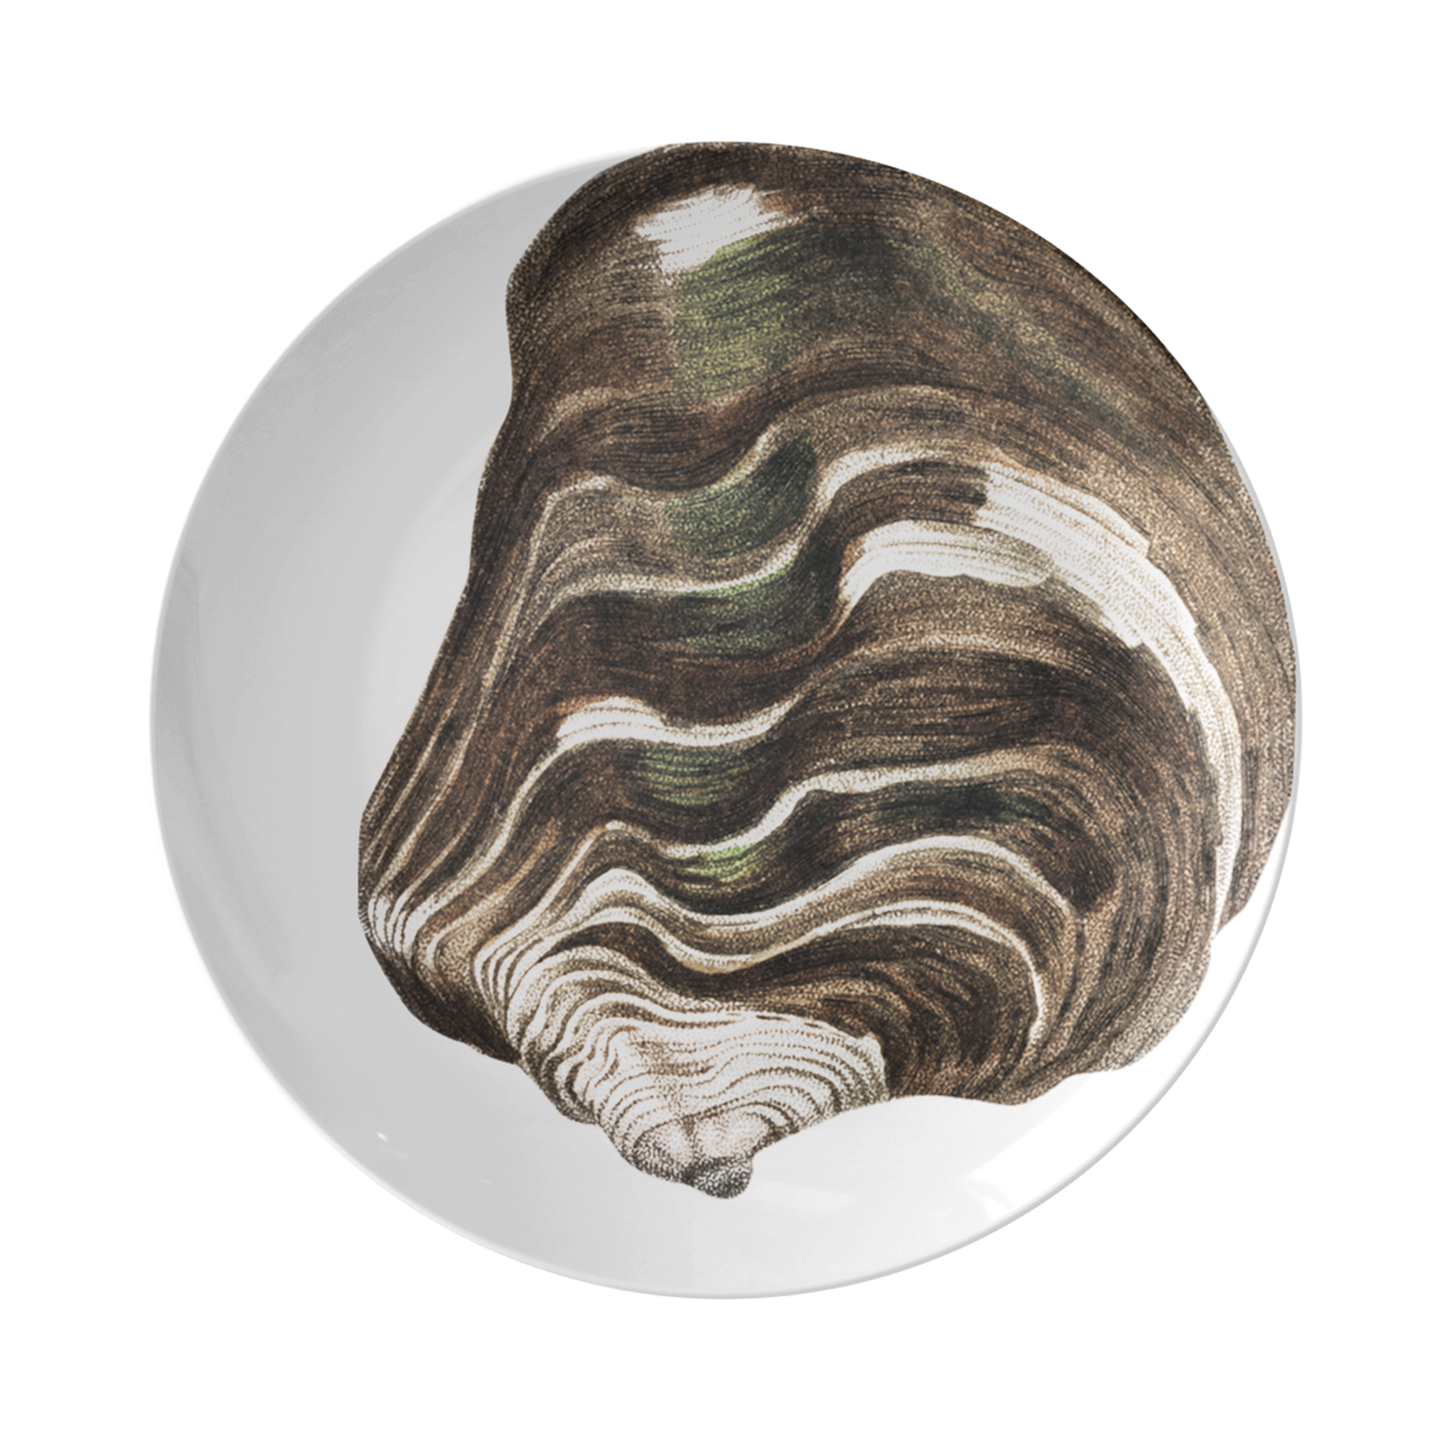 Oyster Shell Print Plastic Plate, Brown & White